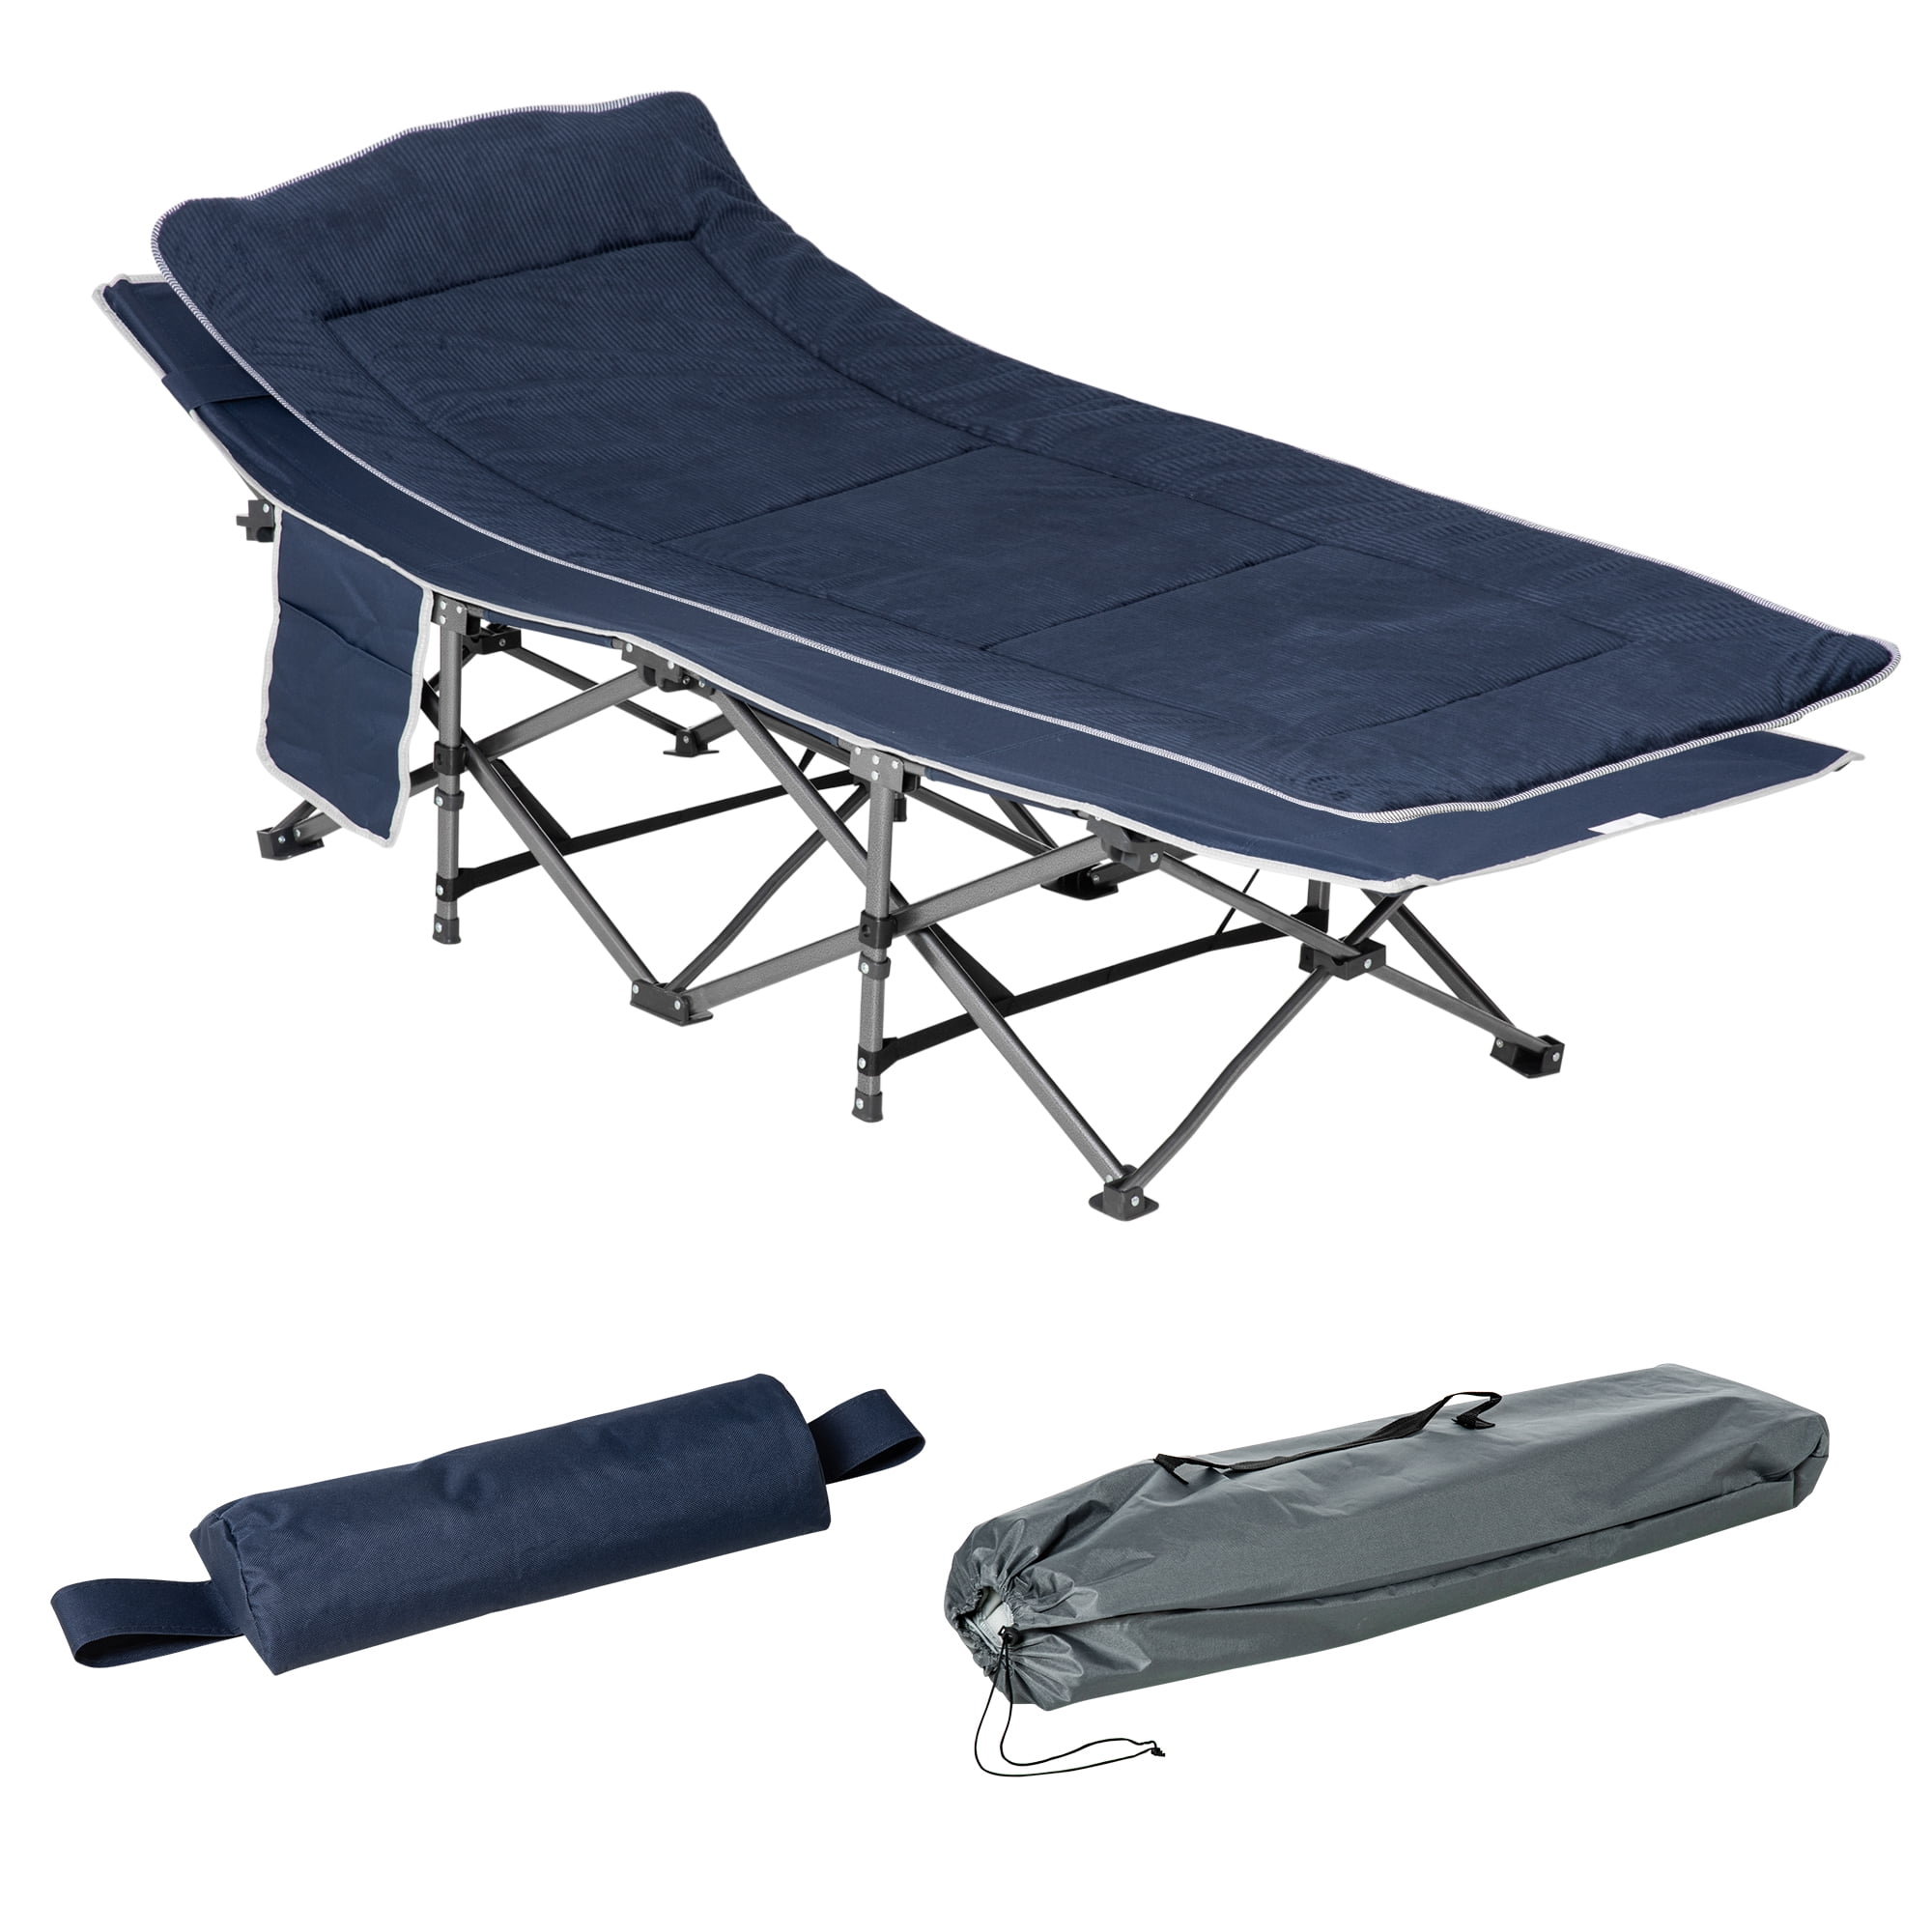 Mattress US Folding Camping Cot Adult Sleep Bed In/Outdoor Use Travel Carry Bed 